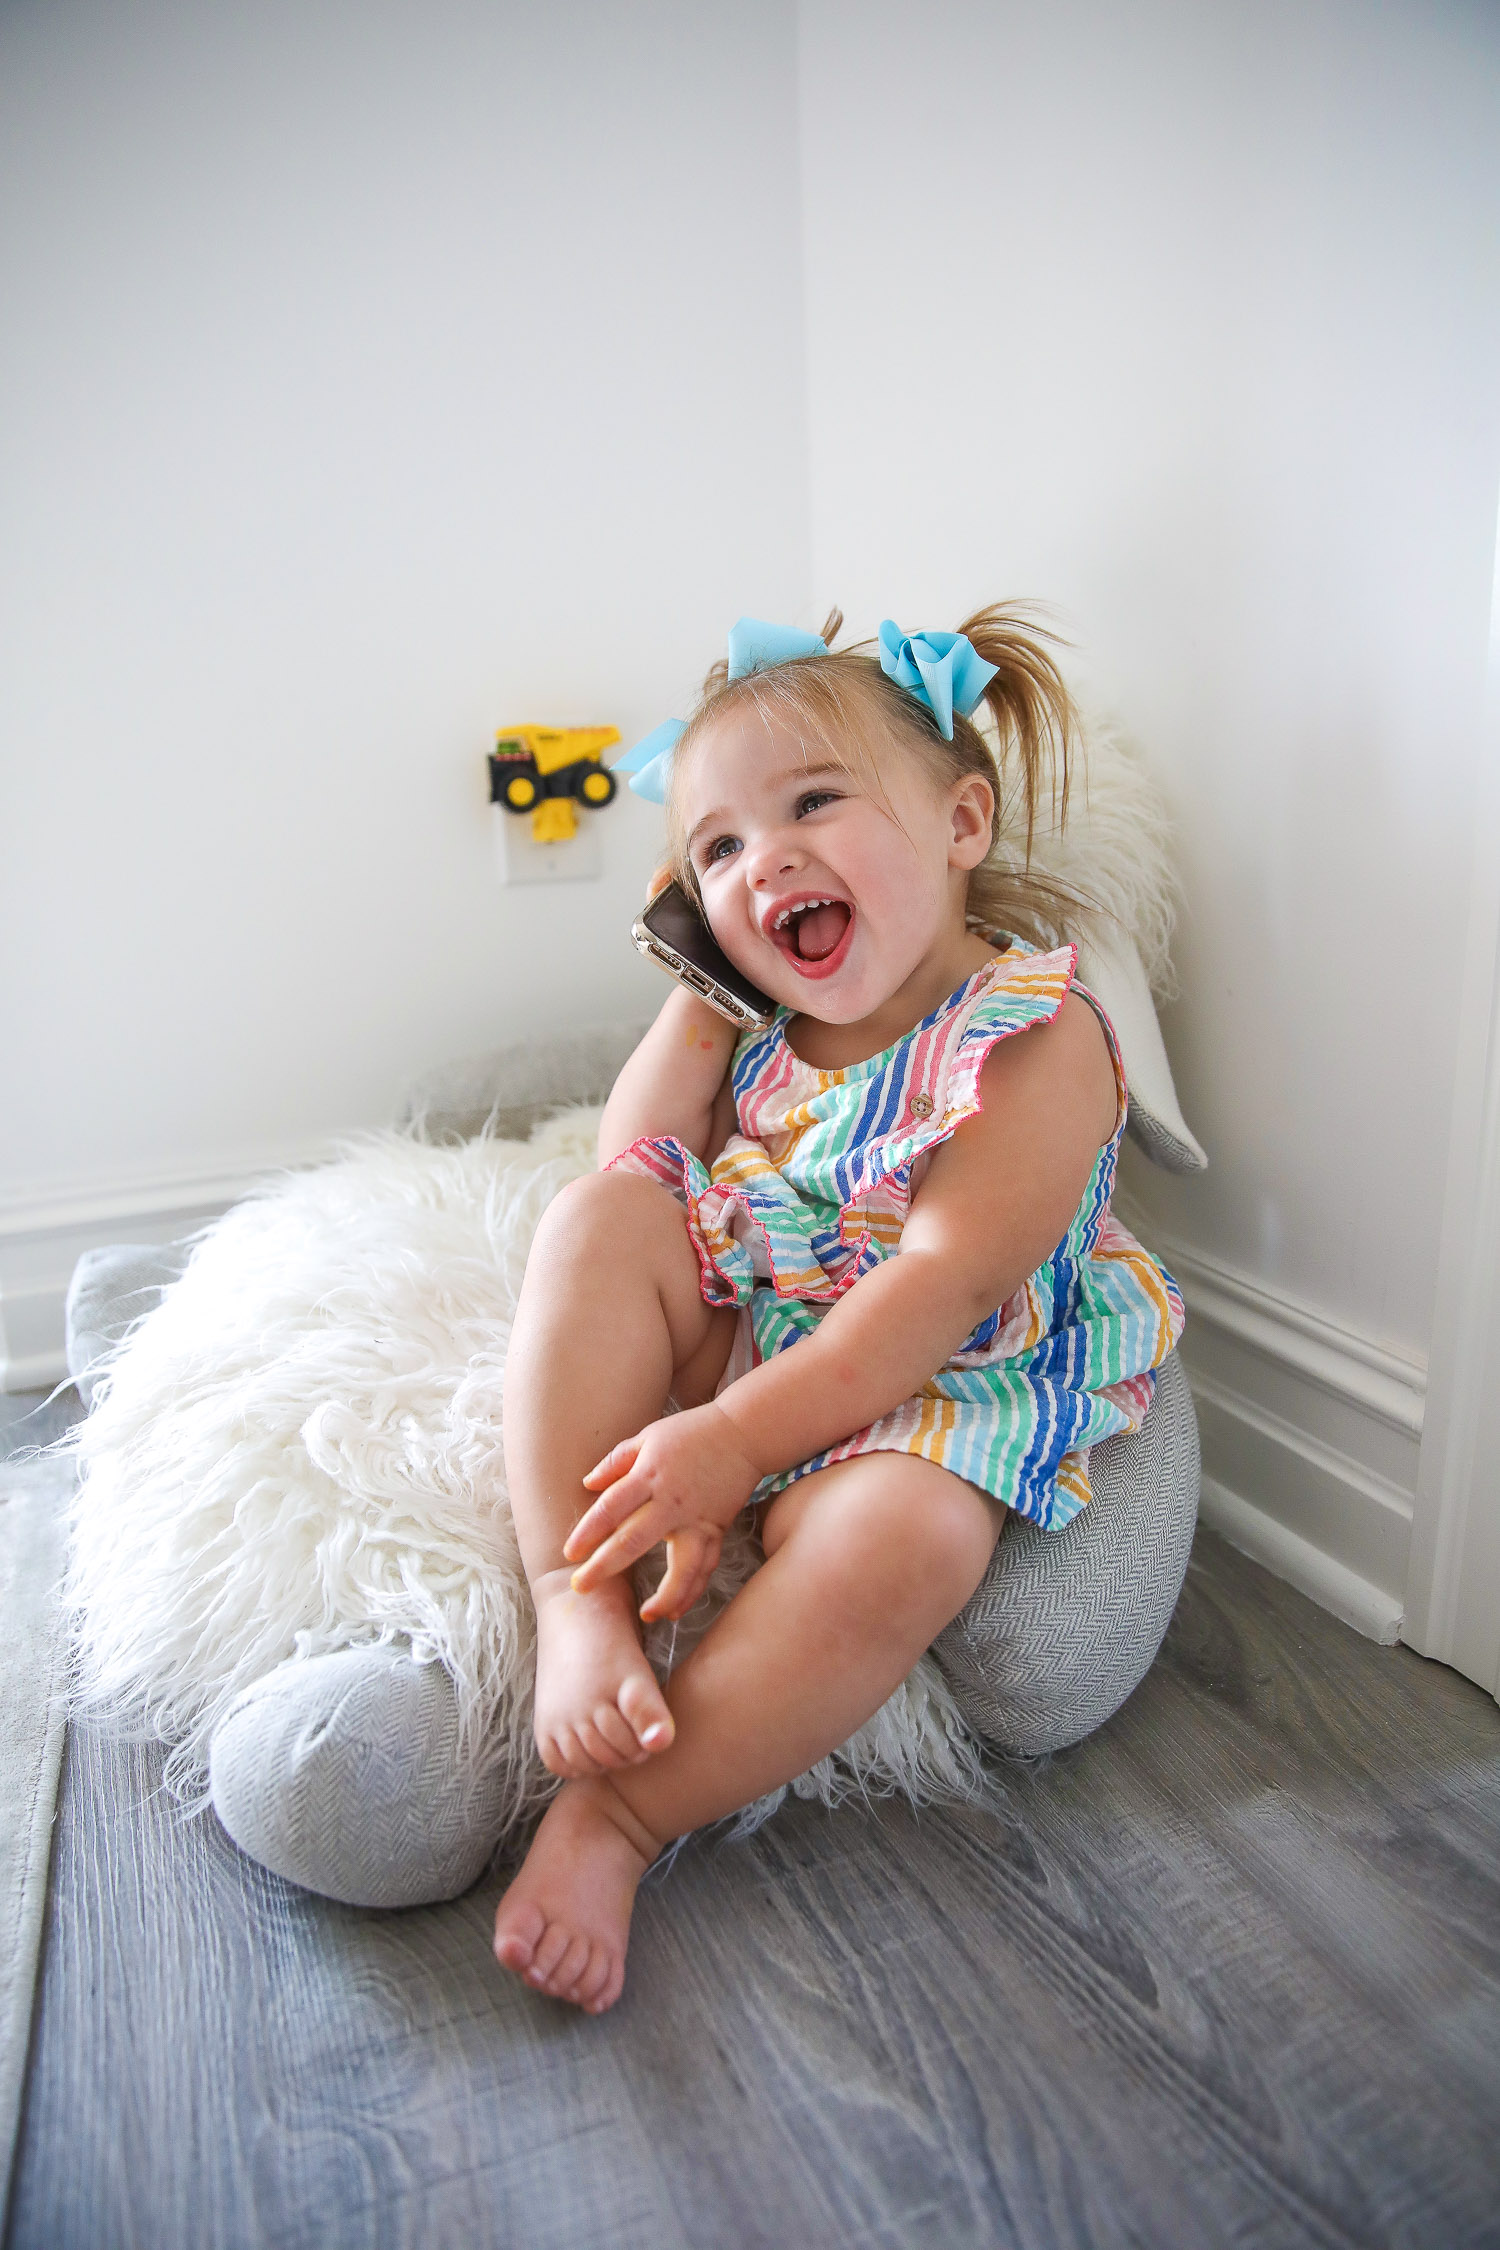 walmart kids home organization must haves, playroom organization ideas, emily gemma, the sweetest thing blog | Playroom Organization by popular US life and style blog, The Sweetest Thing: image of a little girl sitting on a floor pillow and holding a smartphone. 